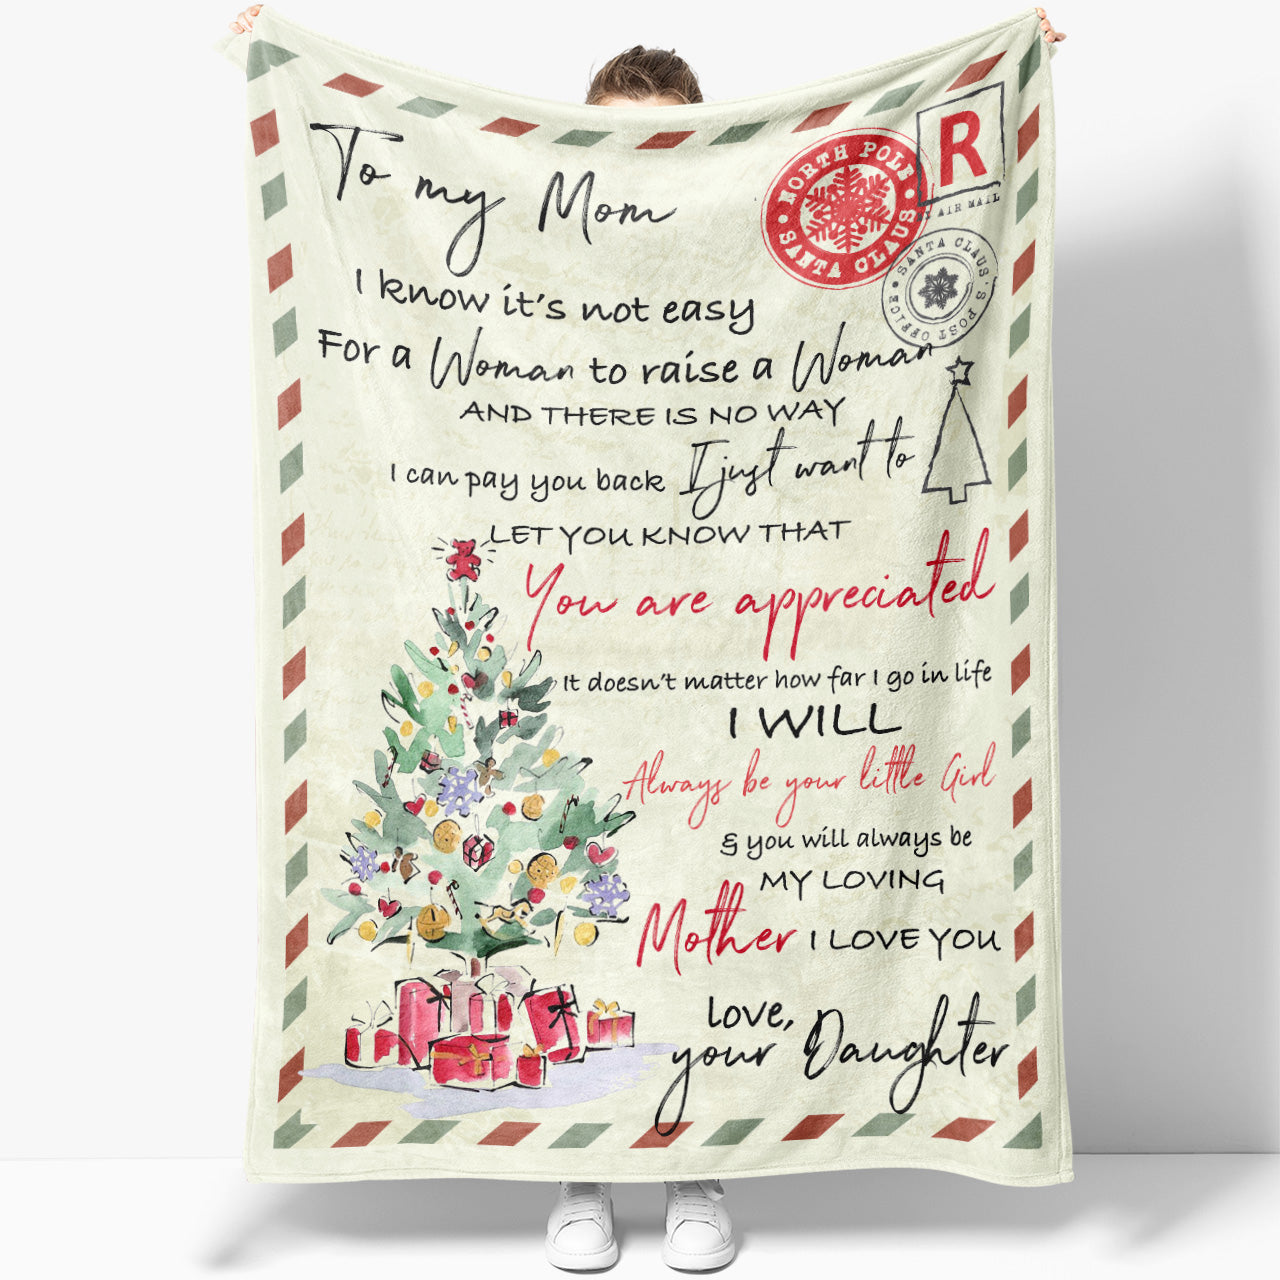 Blanket Gift Ideas For Mom, Christmas Gifts For Mom, Its Not Easy